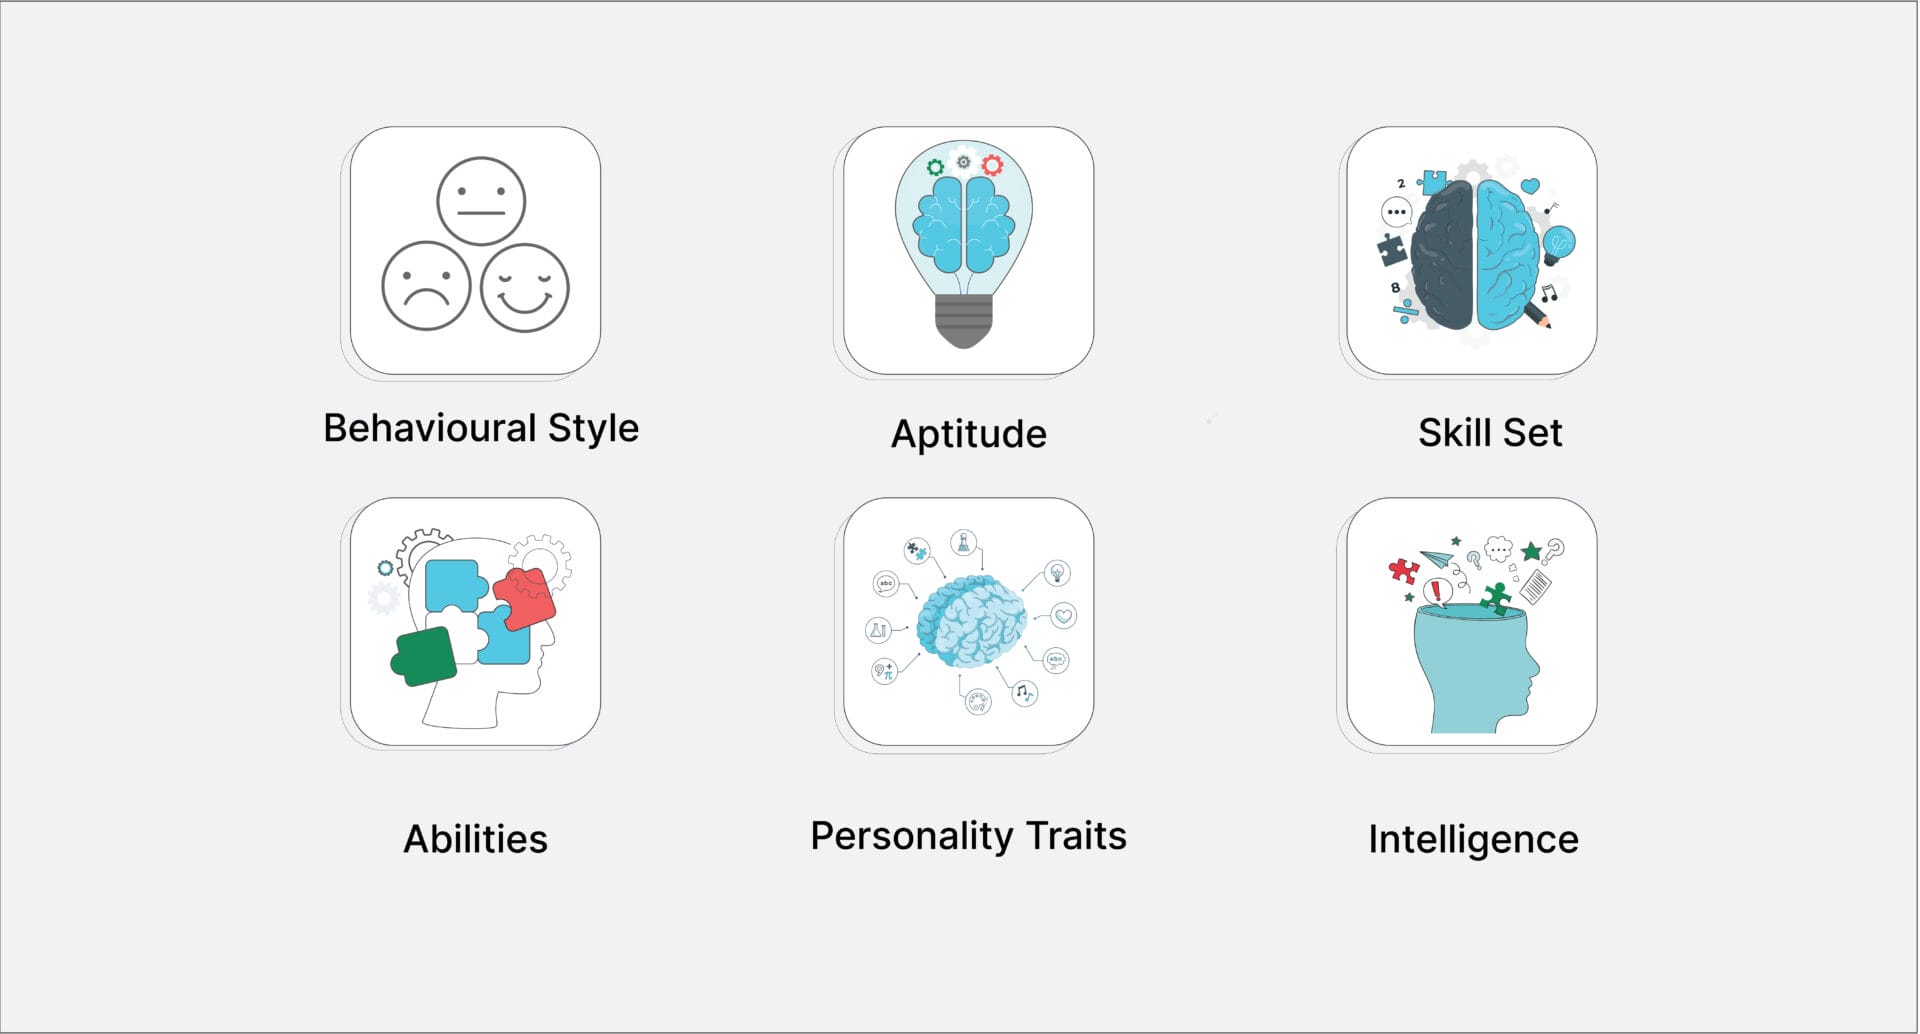 A Beginner's Guide for Psychometric Assessments